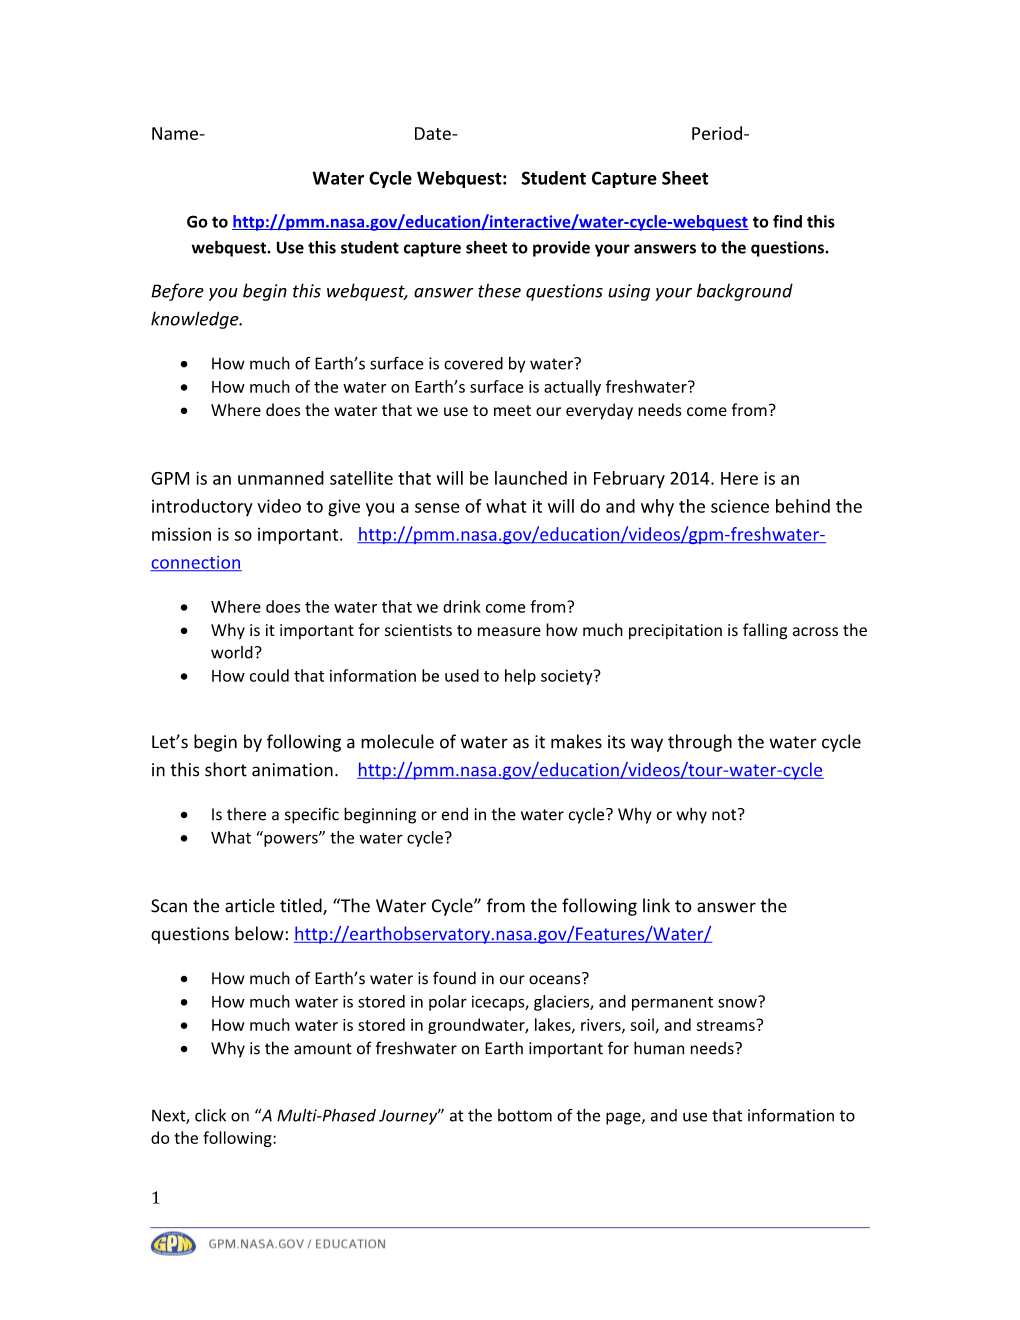 Water Cycle Webquest: Student Capture Sheet